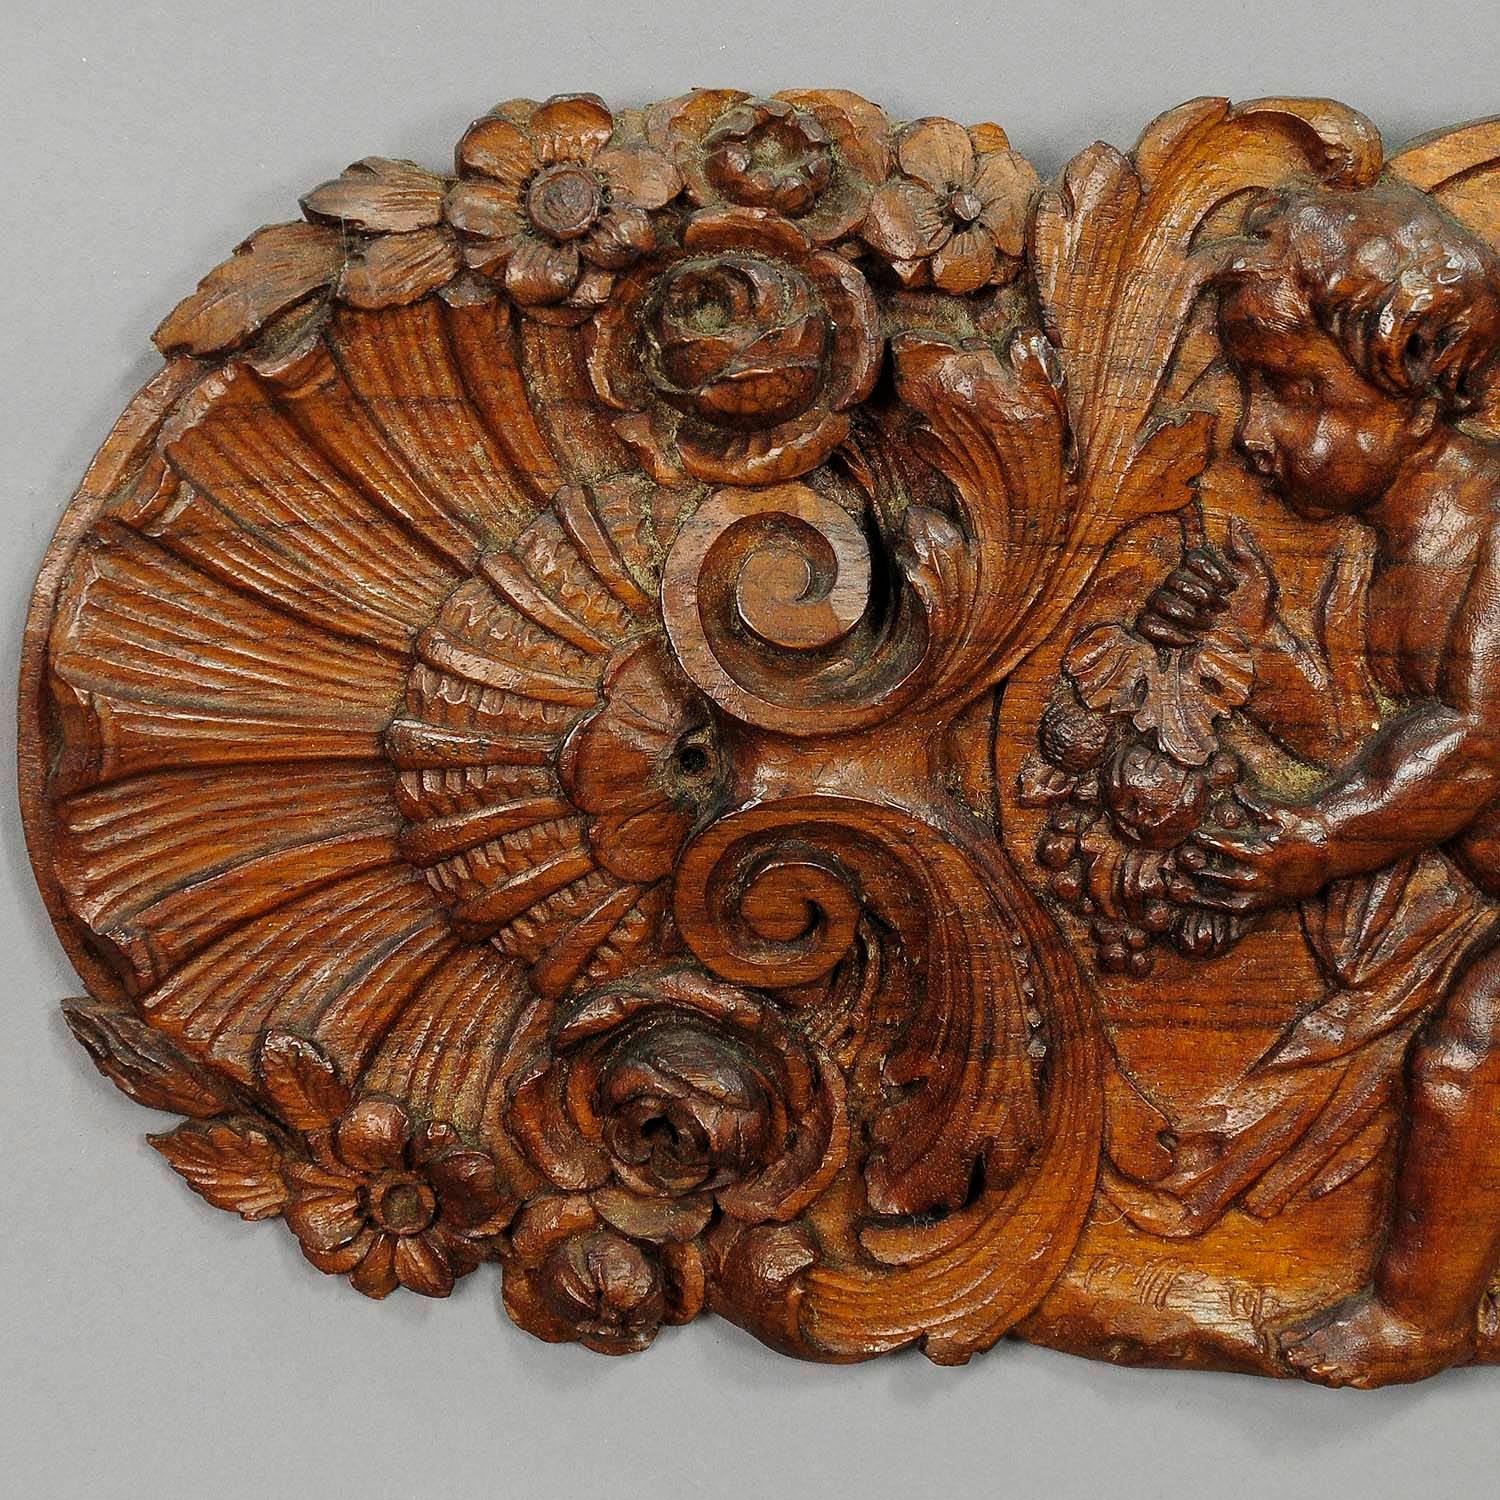 A lovely wooden wall application with cherubs and blossoms. Hand carved circa 1920 in Germany.

Measures: Width 16.34